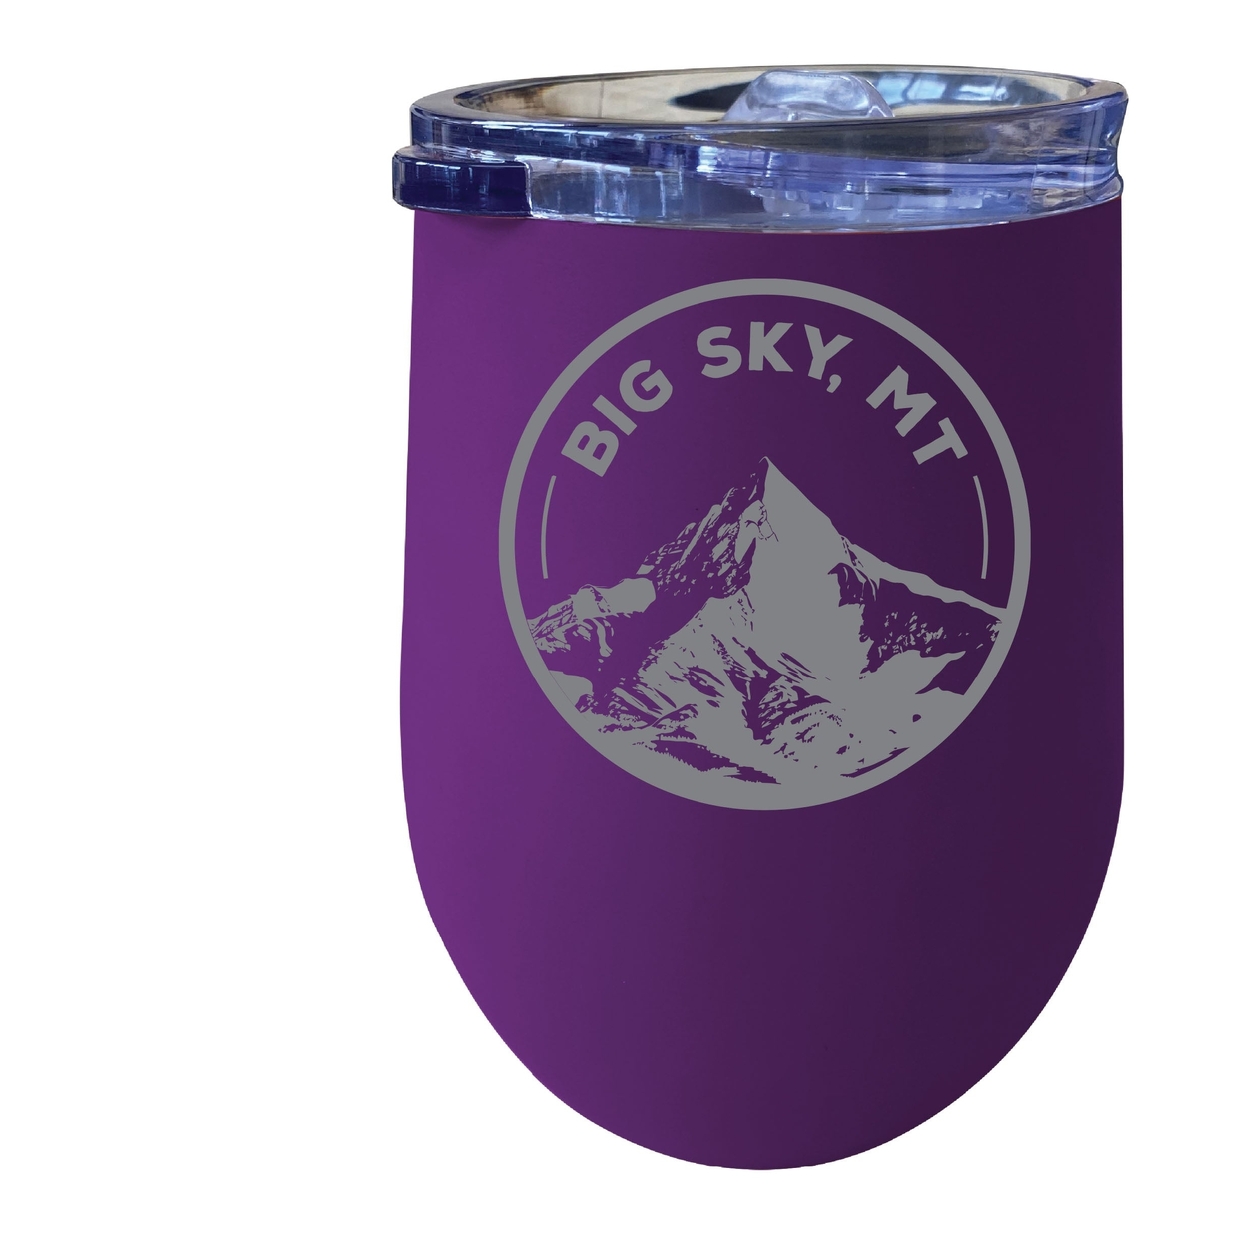 Big Sky Montana Souvenir 12 Oz Engraved Insulated Wine Stainless Steel Tumbler - Purple,,4-Pack